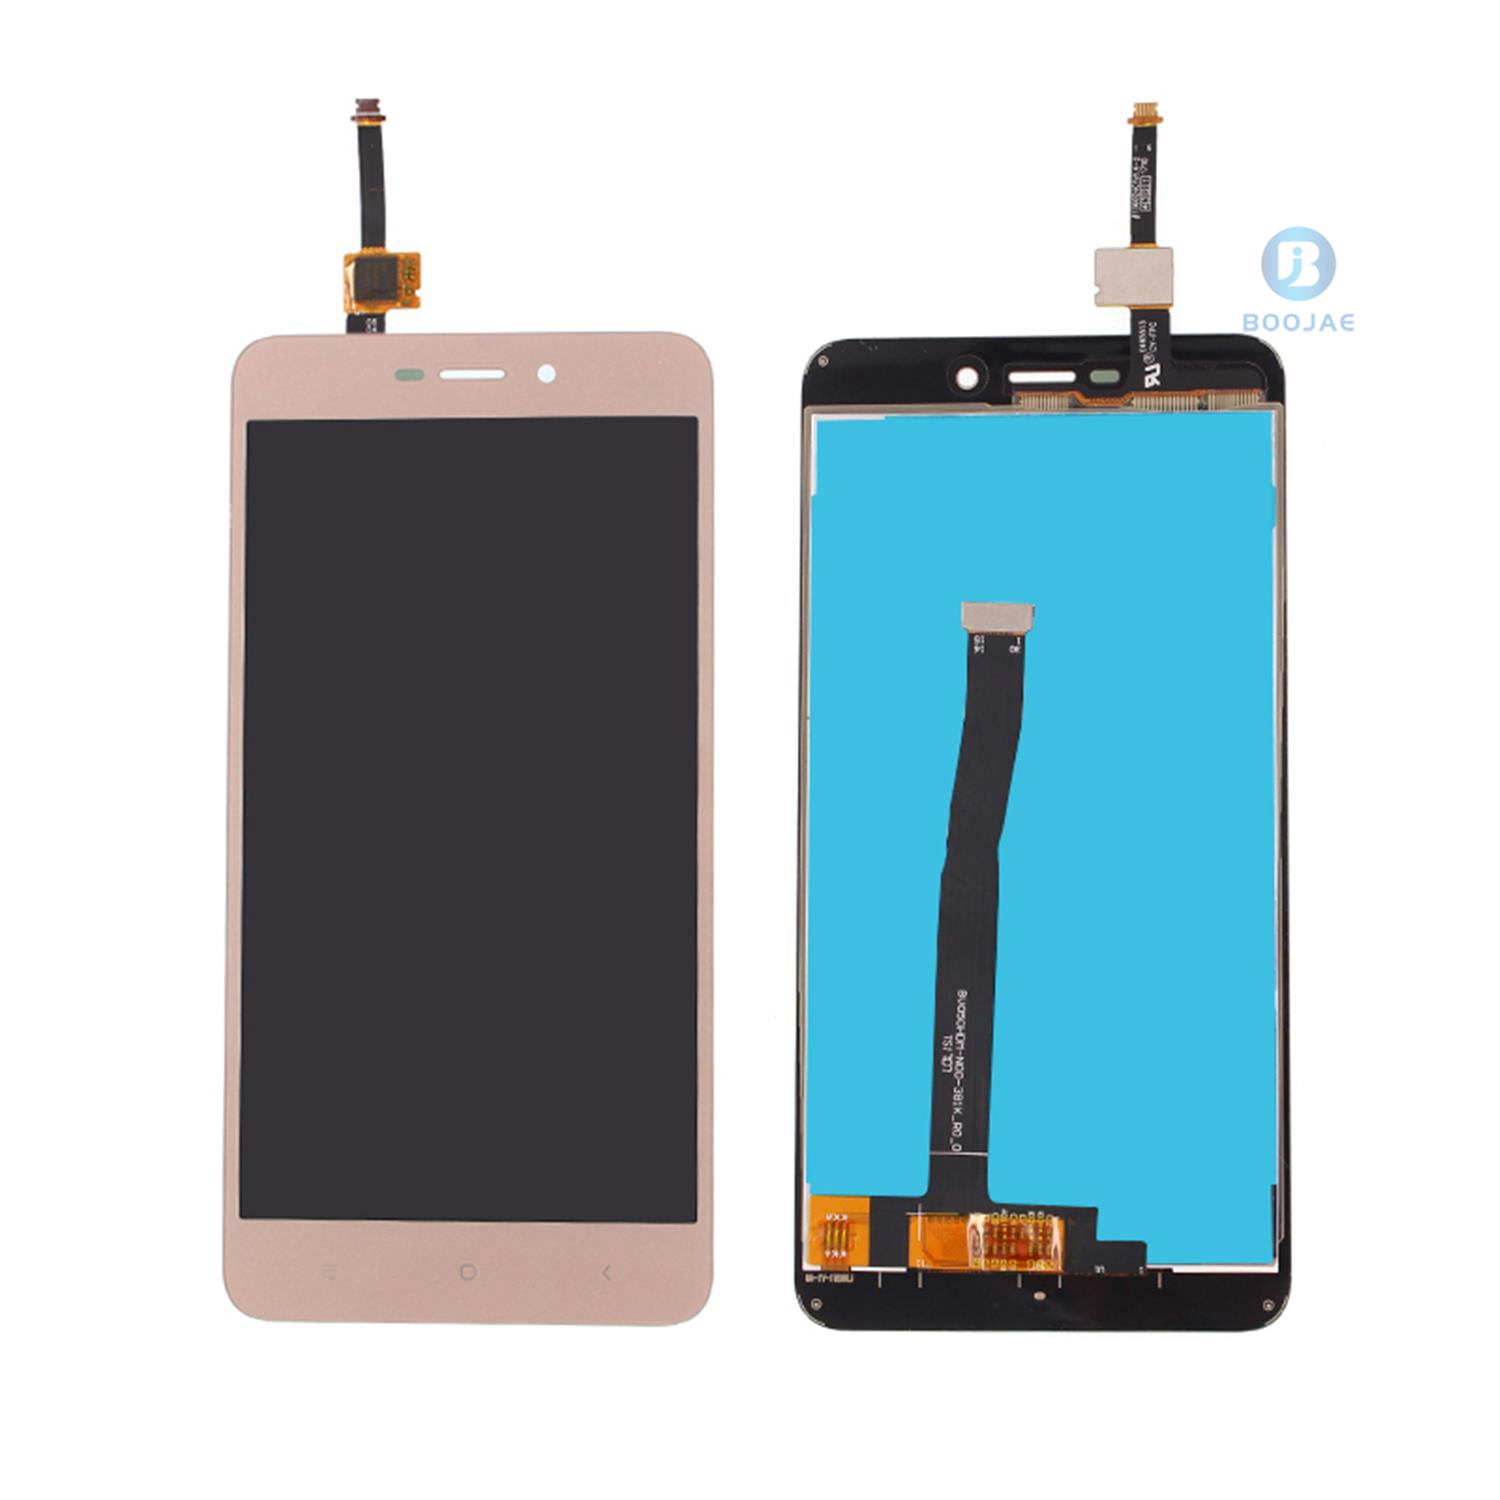 For Xiaomi Redmi 4A LCD Screen Display and Touch Panel Digitizer Assembly Replacement